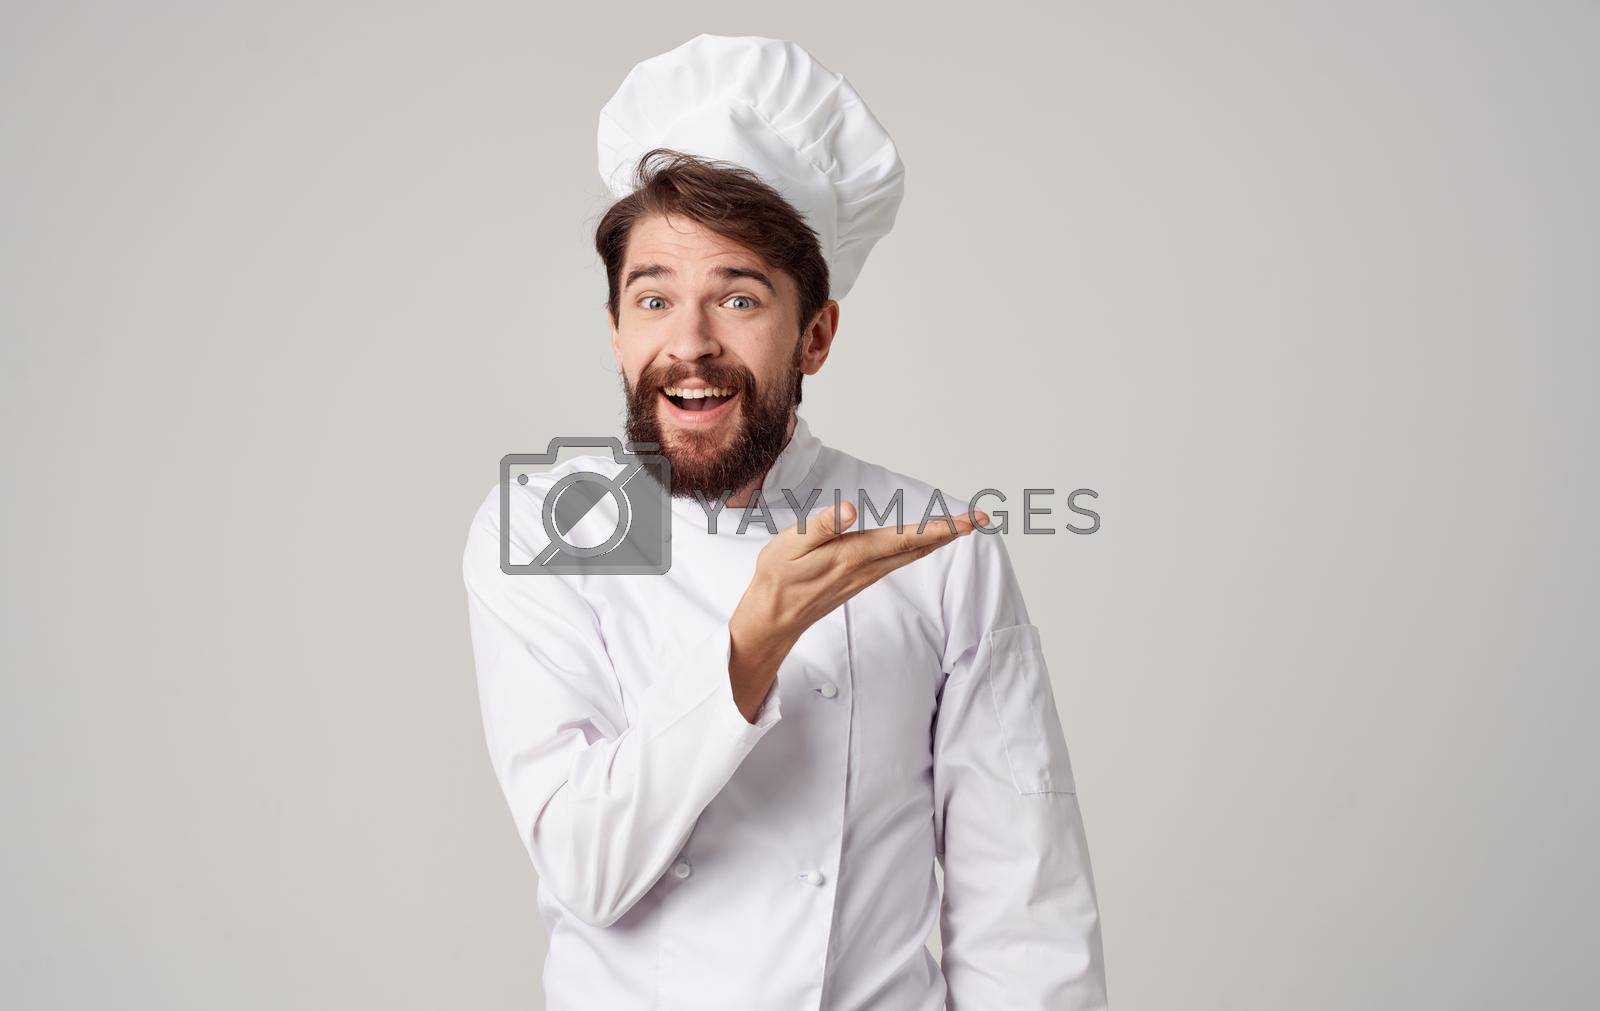 Royalty free image of male chef professional work purchasing emotions isolated background by SHOTPRIME